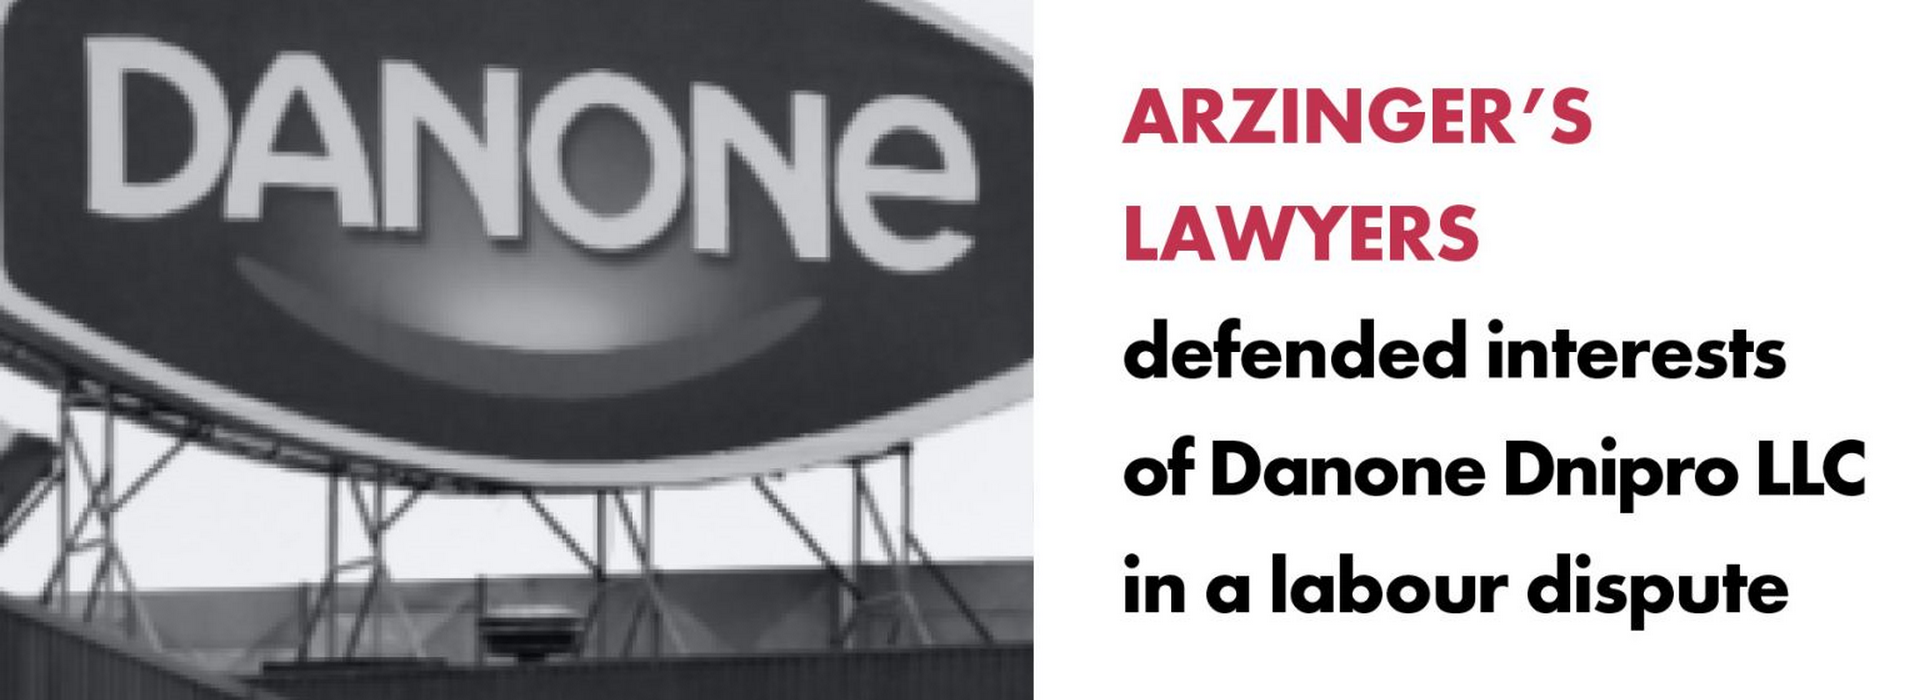 Arzinger’s Lawyers Defended Interests of Danone Dnipro LLC in a Labour Dispute